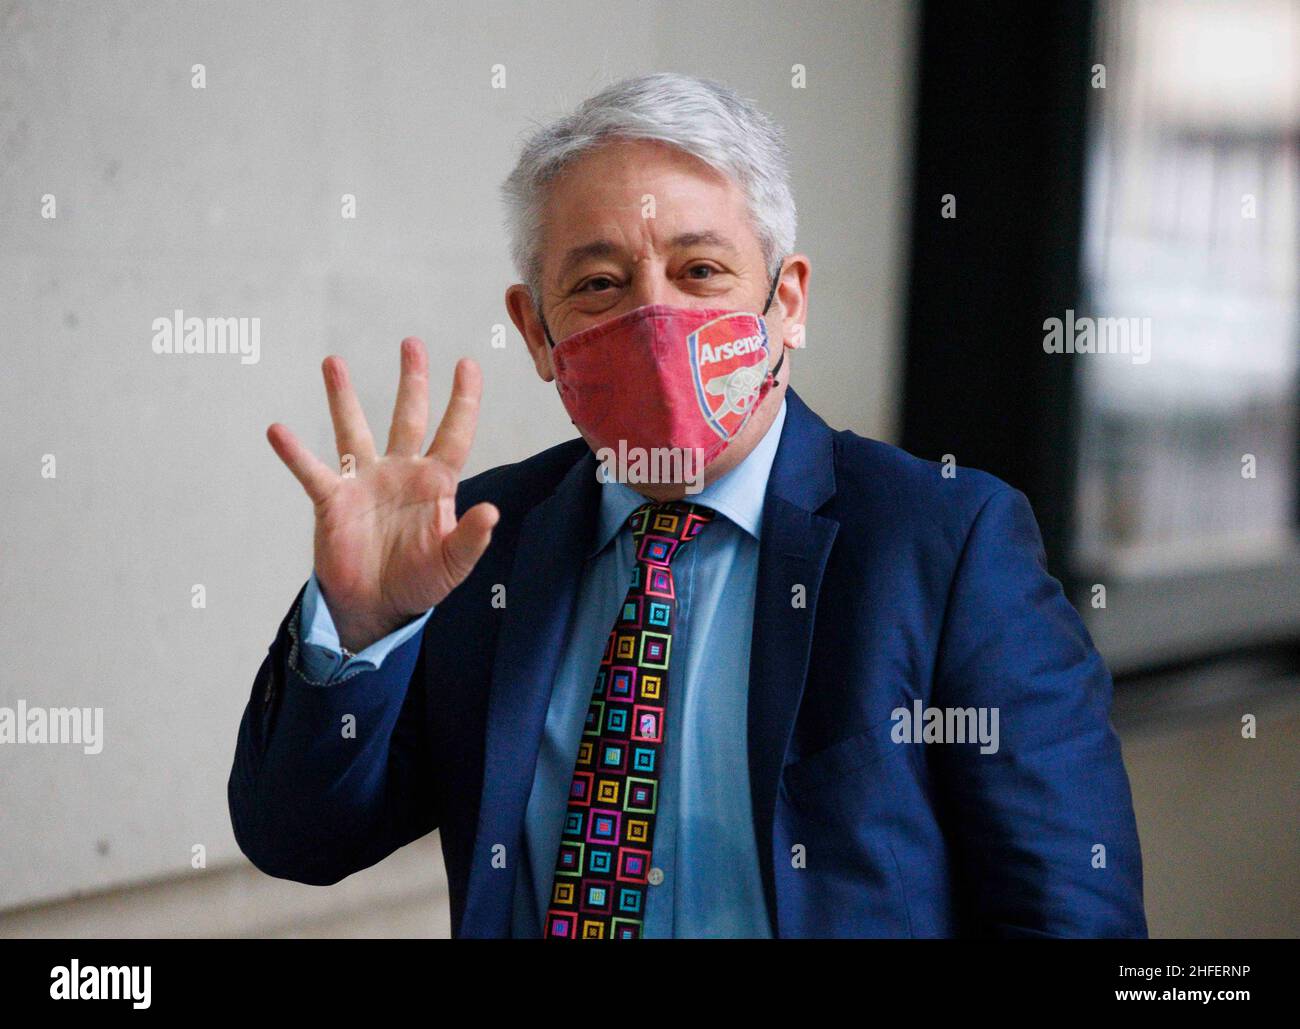 London, UK. 16th Jan, 2022. Former speaker, John Bercow, arrrives at the BBC Studios wearing an Arsenal mask. Bercow was found guilty on 21 counts out of 35 of bullying accused by 3 former members of staff Credit: Mark Thomas/Alamy Live News Stock Photo